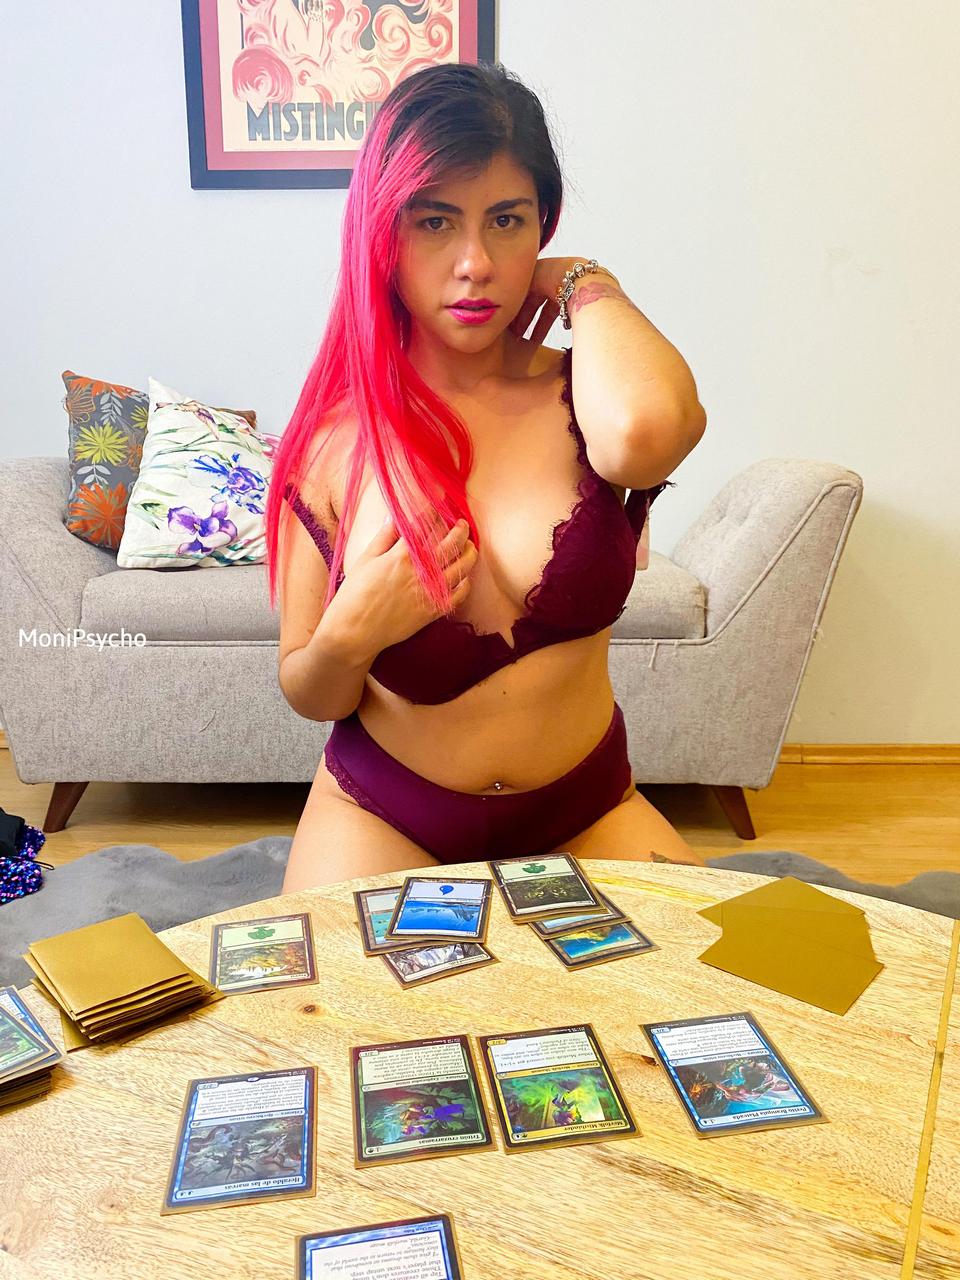 Wanna Play Some Mtg With Me The Loser Takes All The Clothes Of